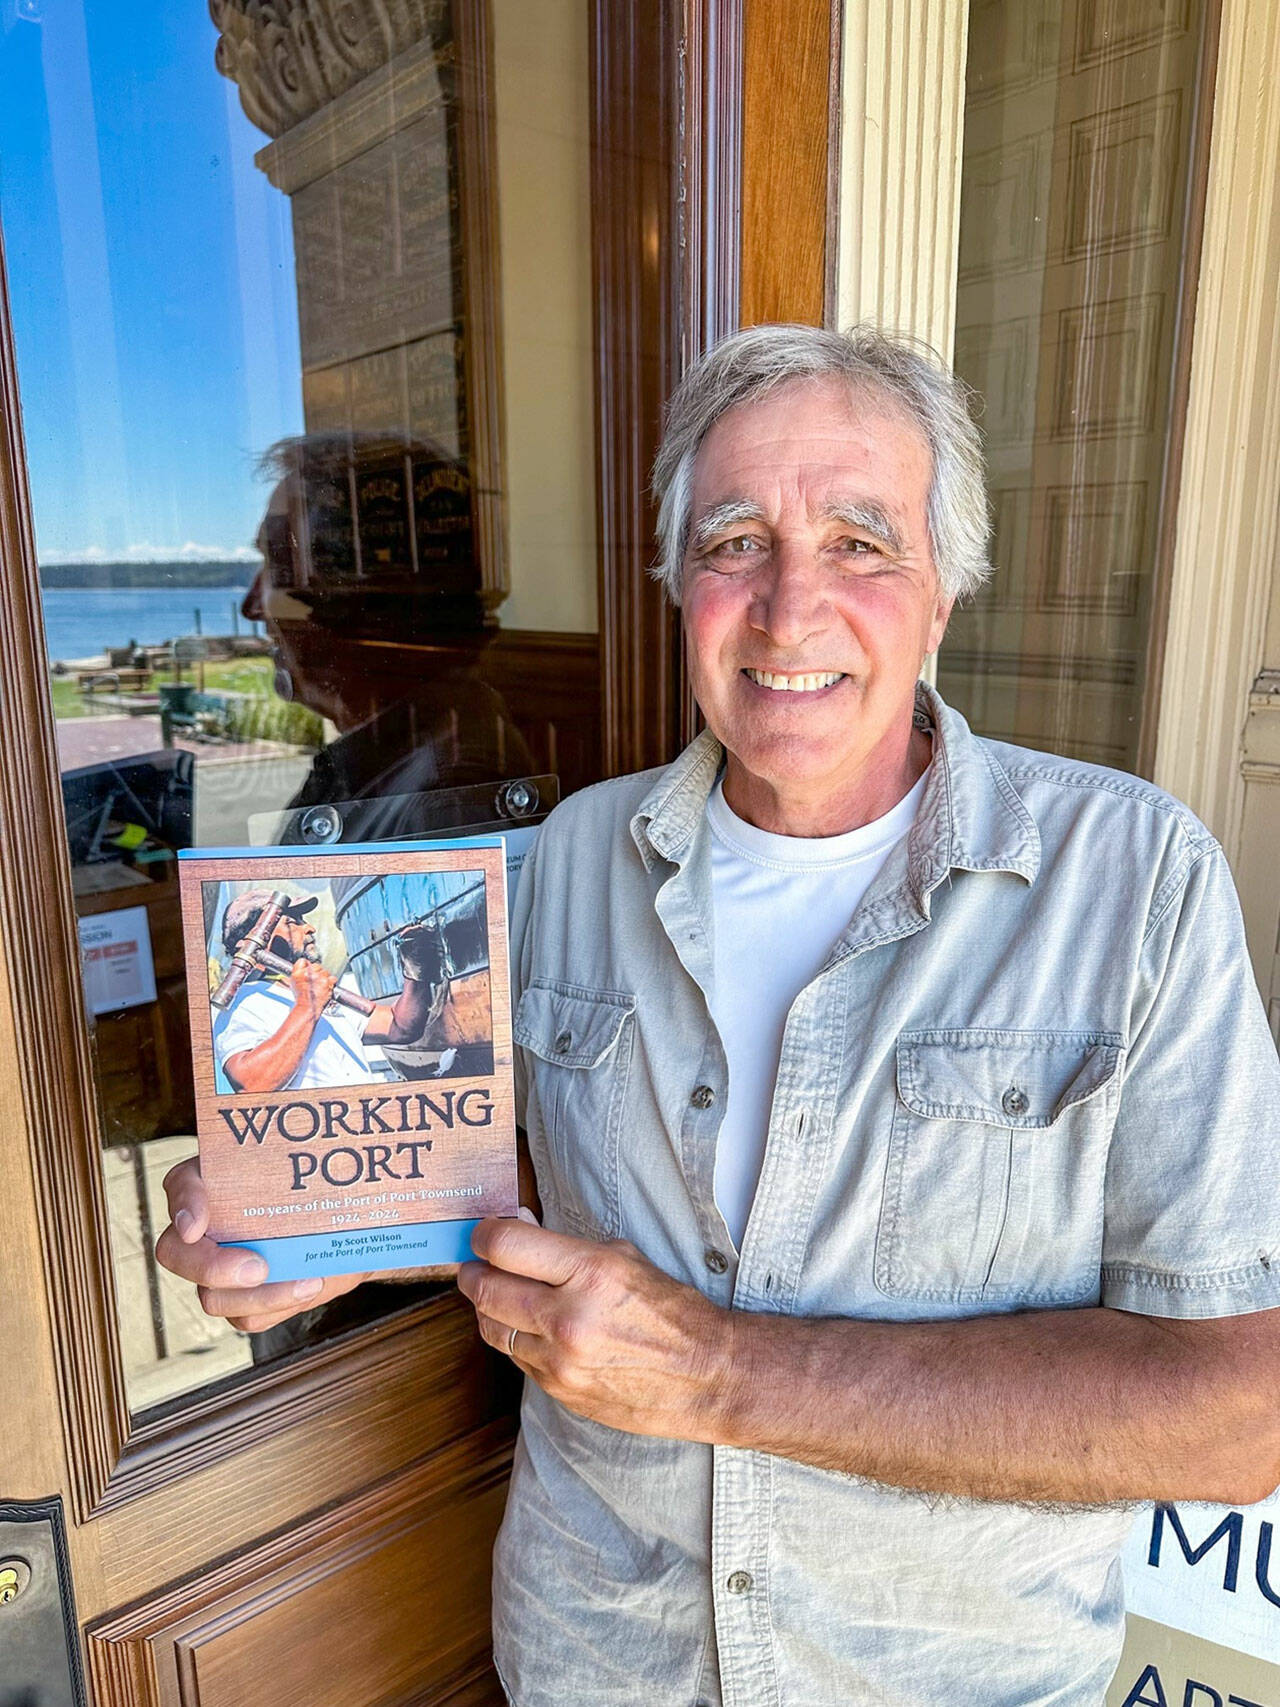 Scott Wilson will sign copies of his new book “Working Port: 100 Years of the Port of Port Townsend” from 11 a.m. to 1 p.m. Saturday.